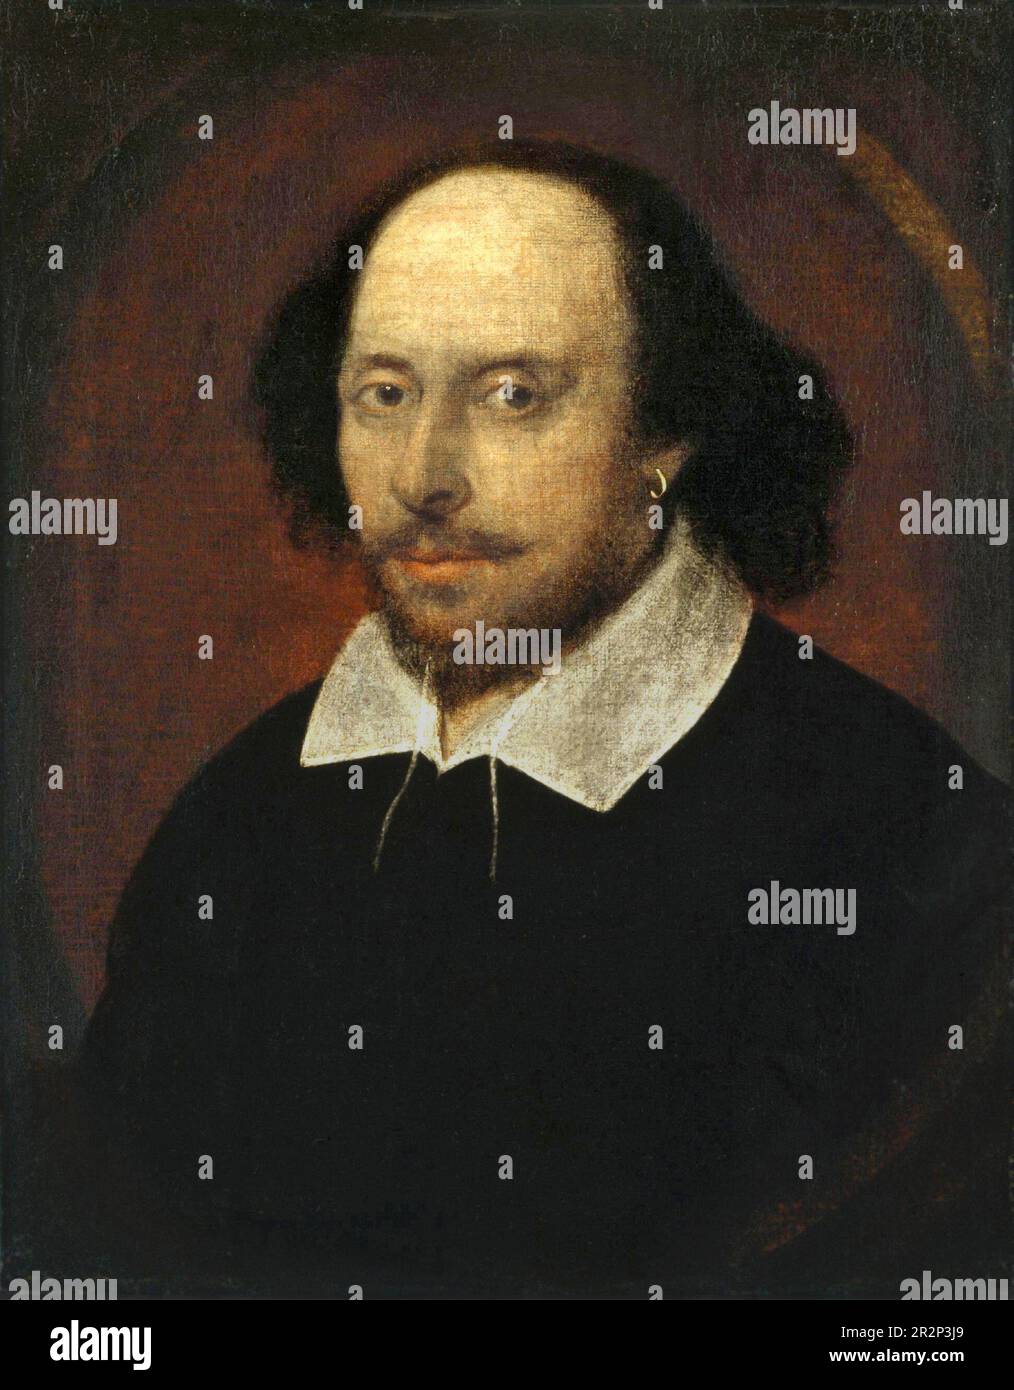 The Chandos Portrait.  Portrait of William Shakespeare (1564-1616).  Attributed to John Taylor.  1610. Stock Photo